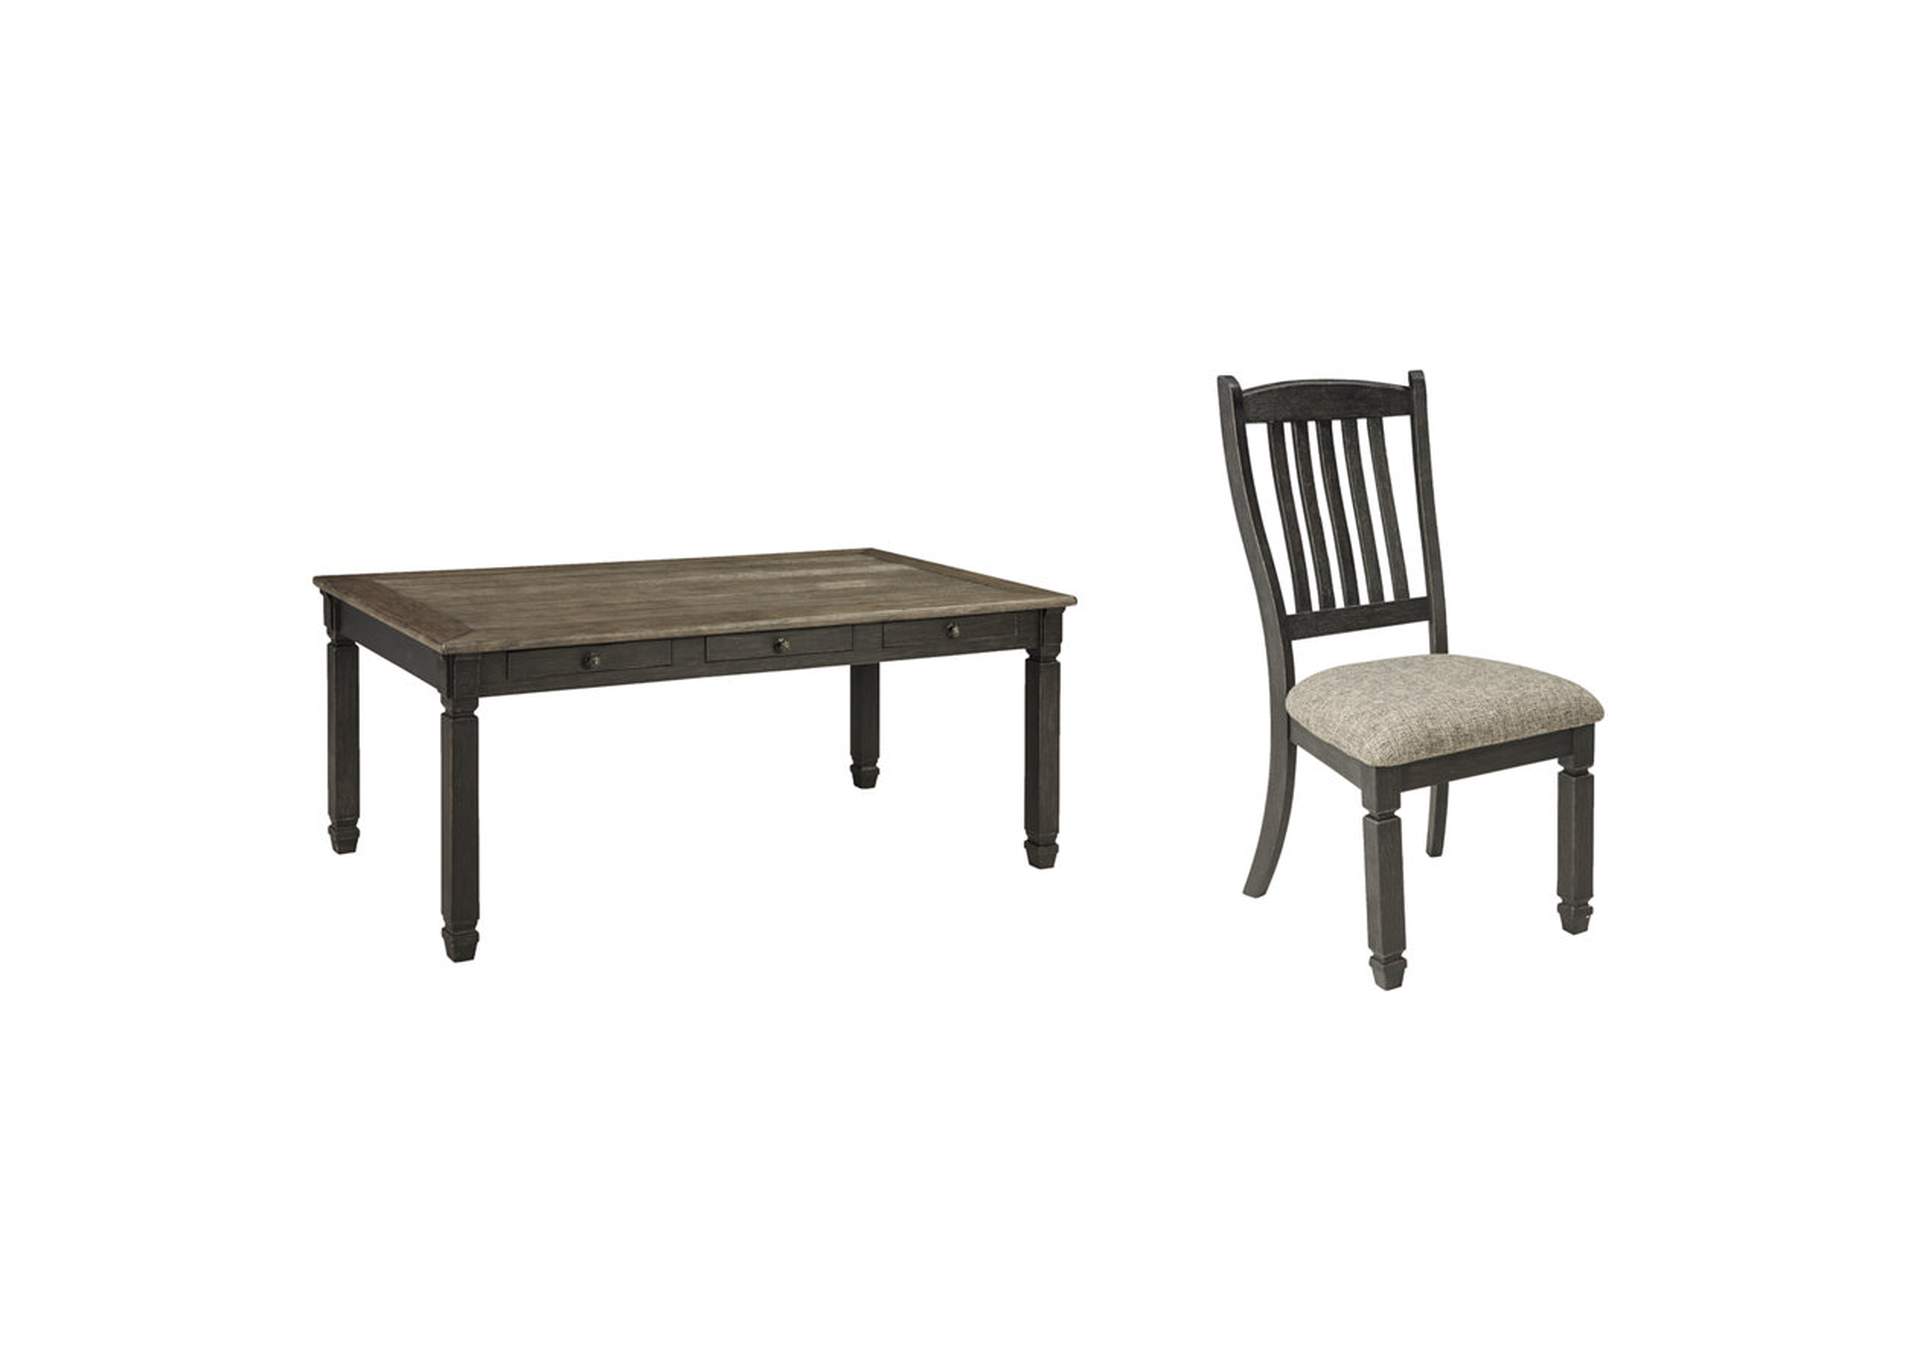 Tyler Creek Dining Table and 6 Chairs,Signature Design By Ashley